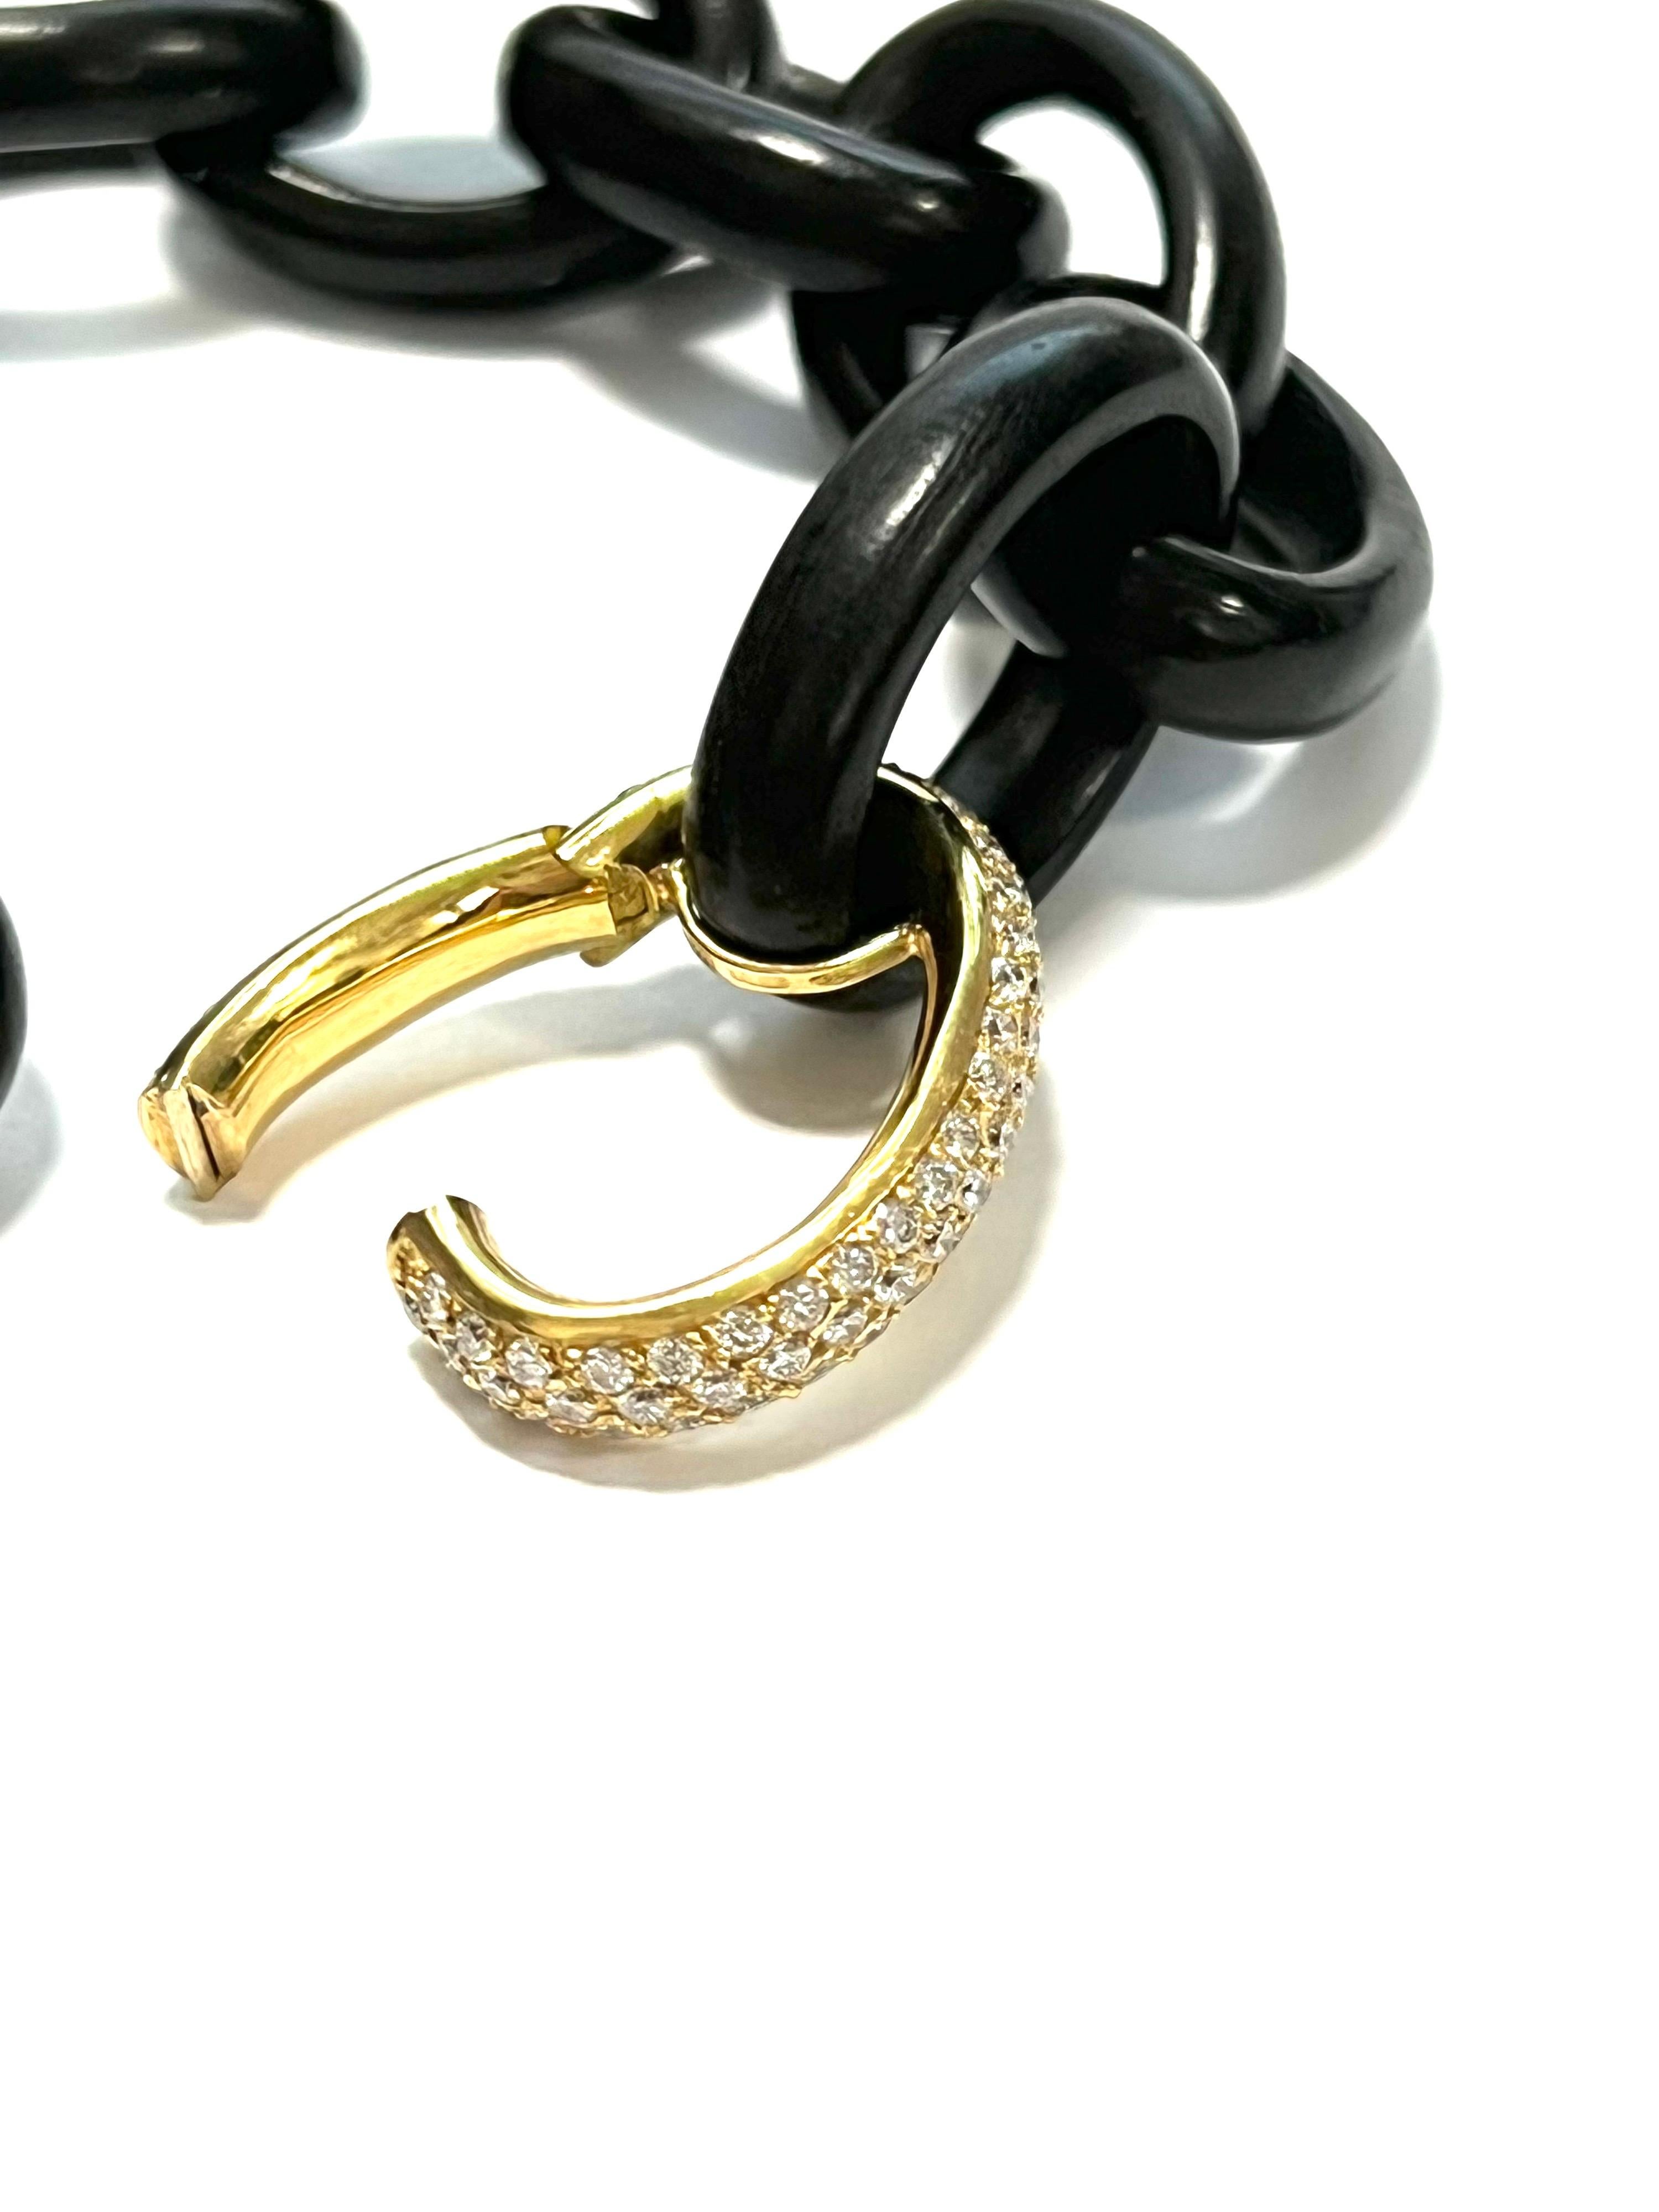 Brilliant Cut Bracelet in Ebony Links with 18k Yellow Gold and Diamond Clasp